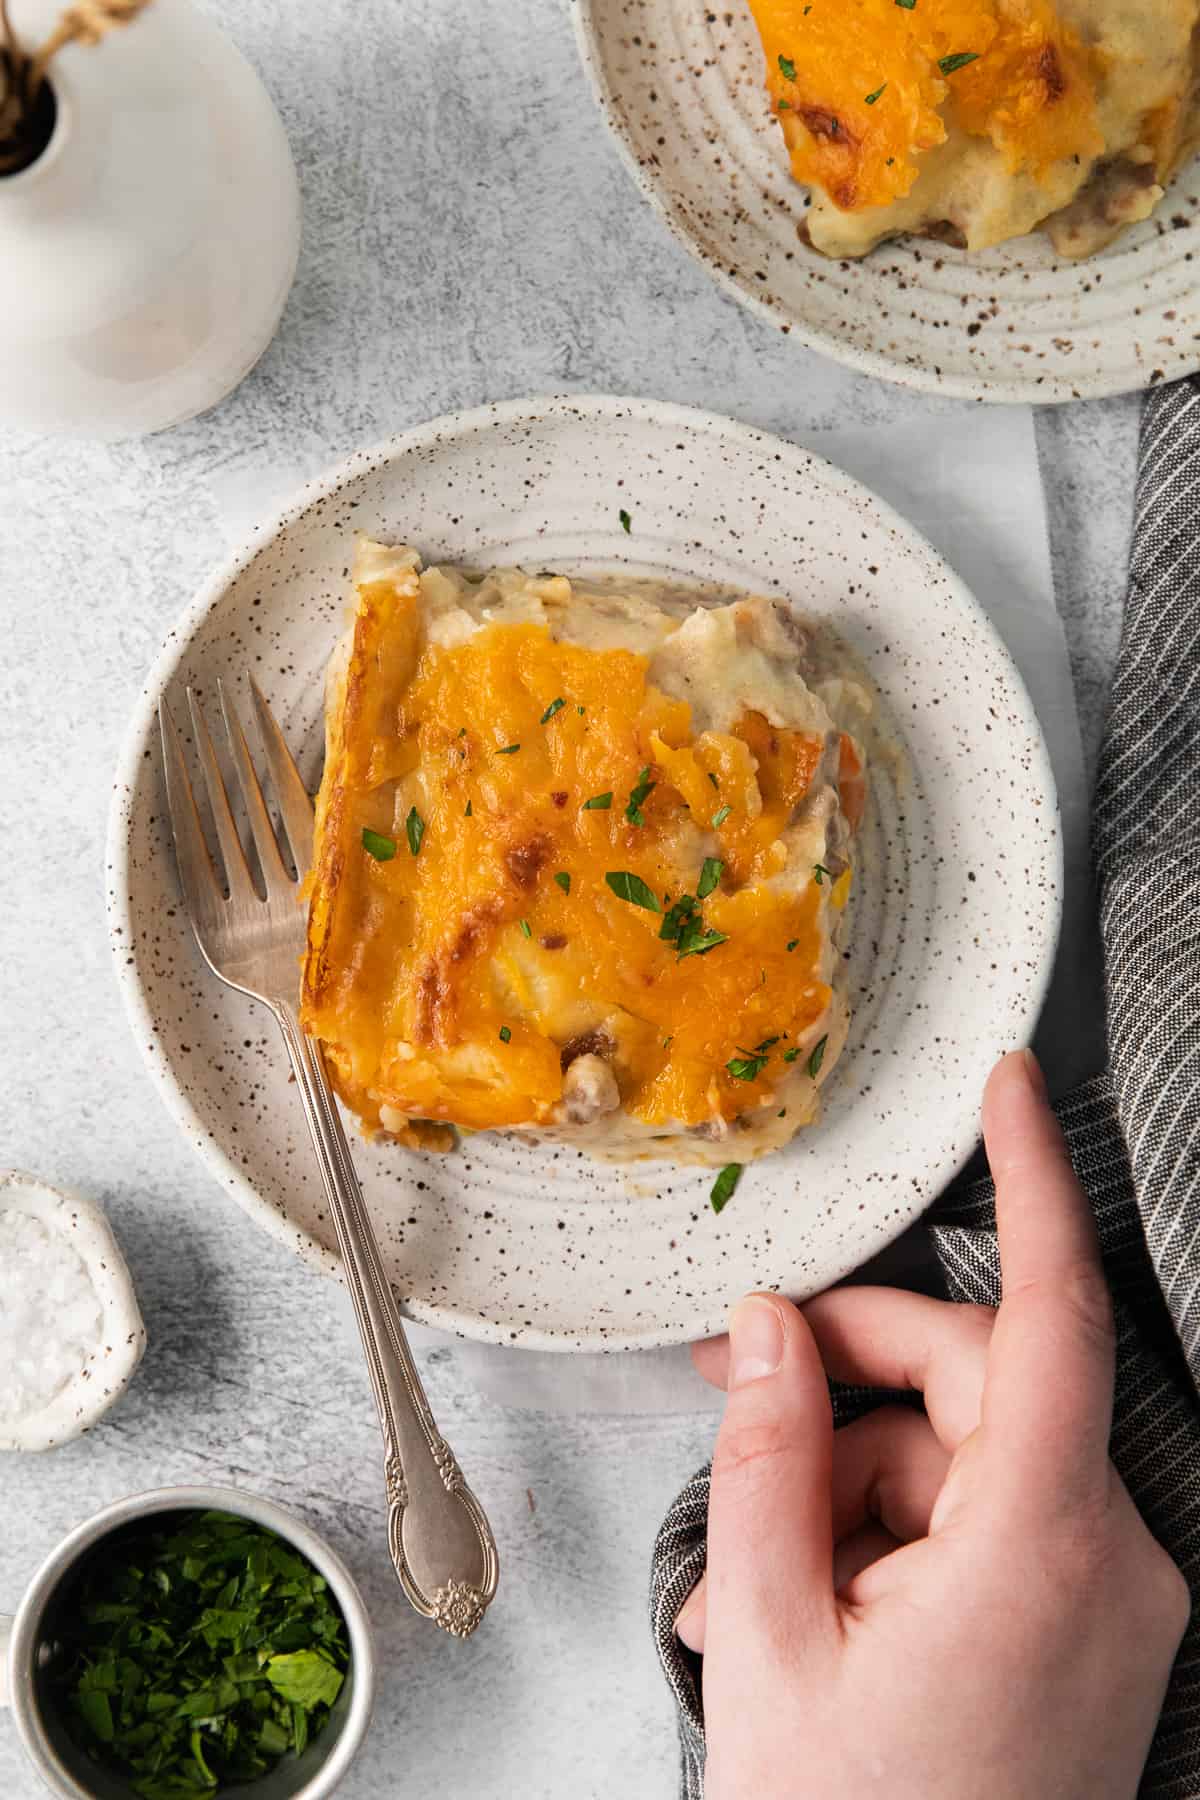 Slice of cheesy shepherd's pie on a plate with a fork.